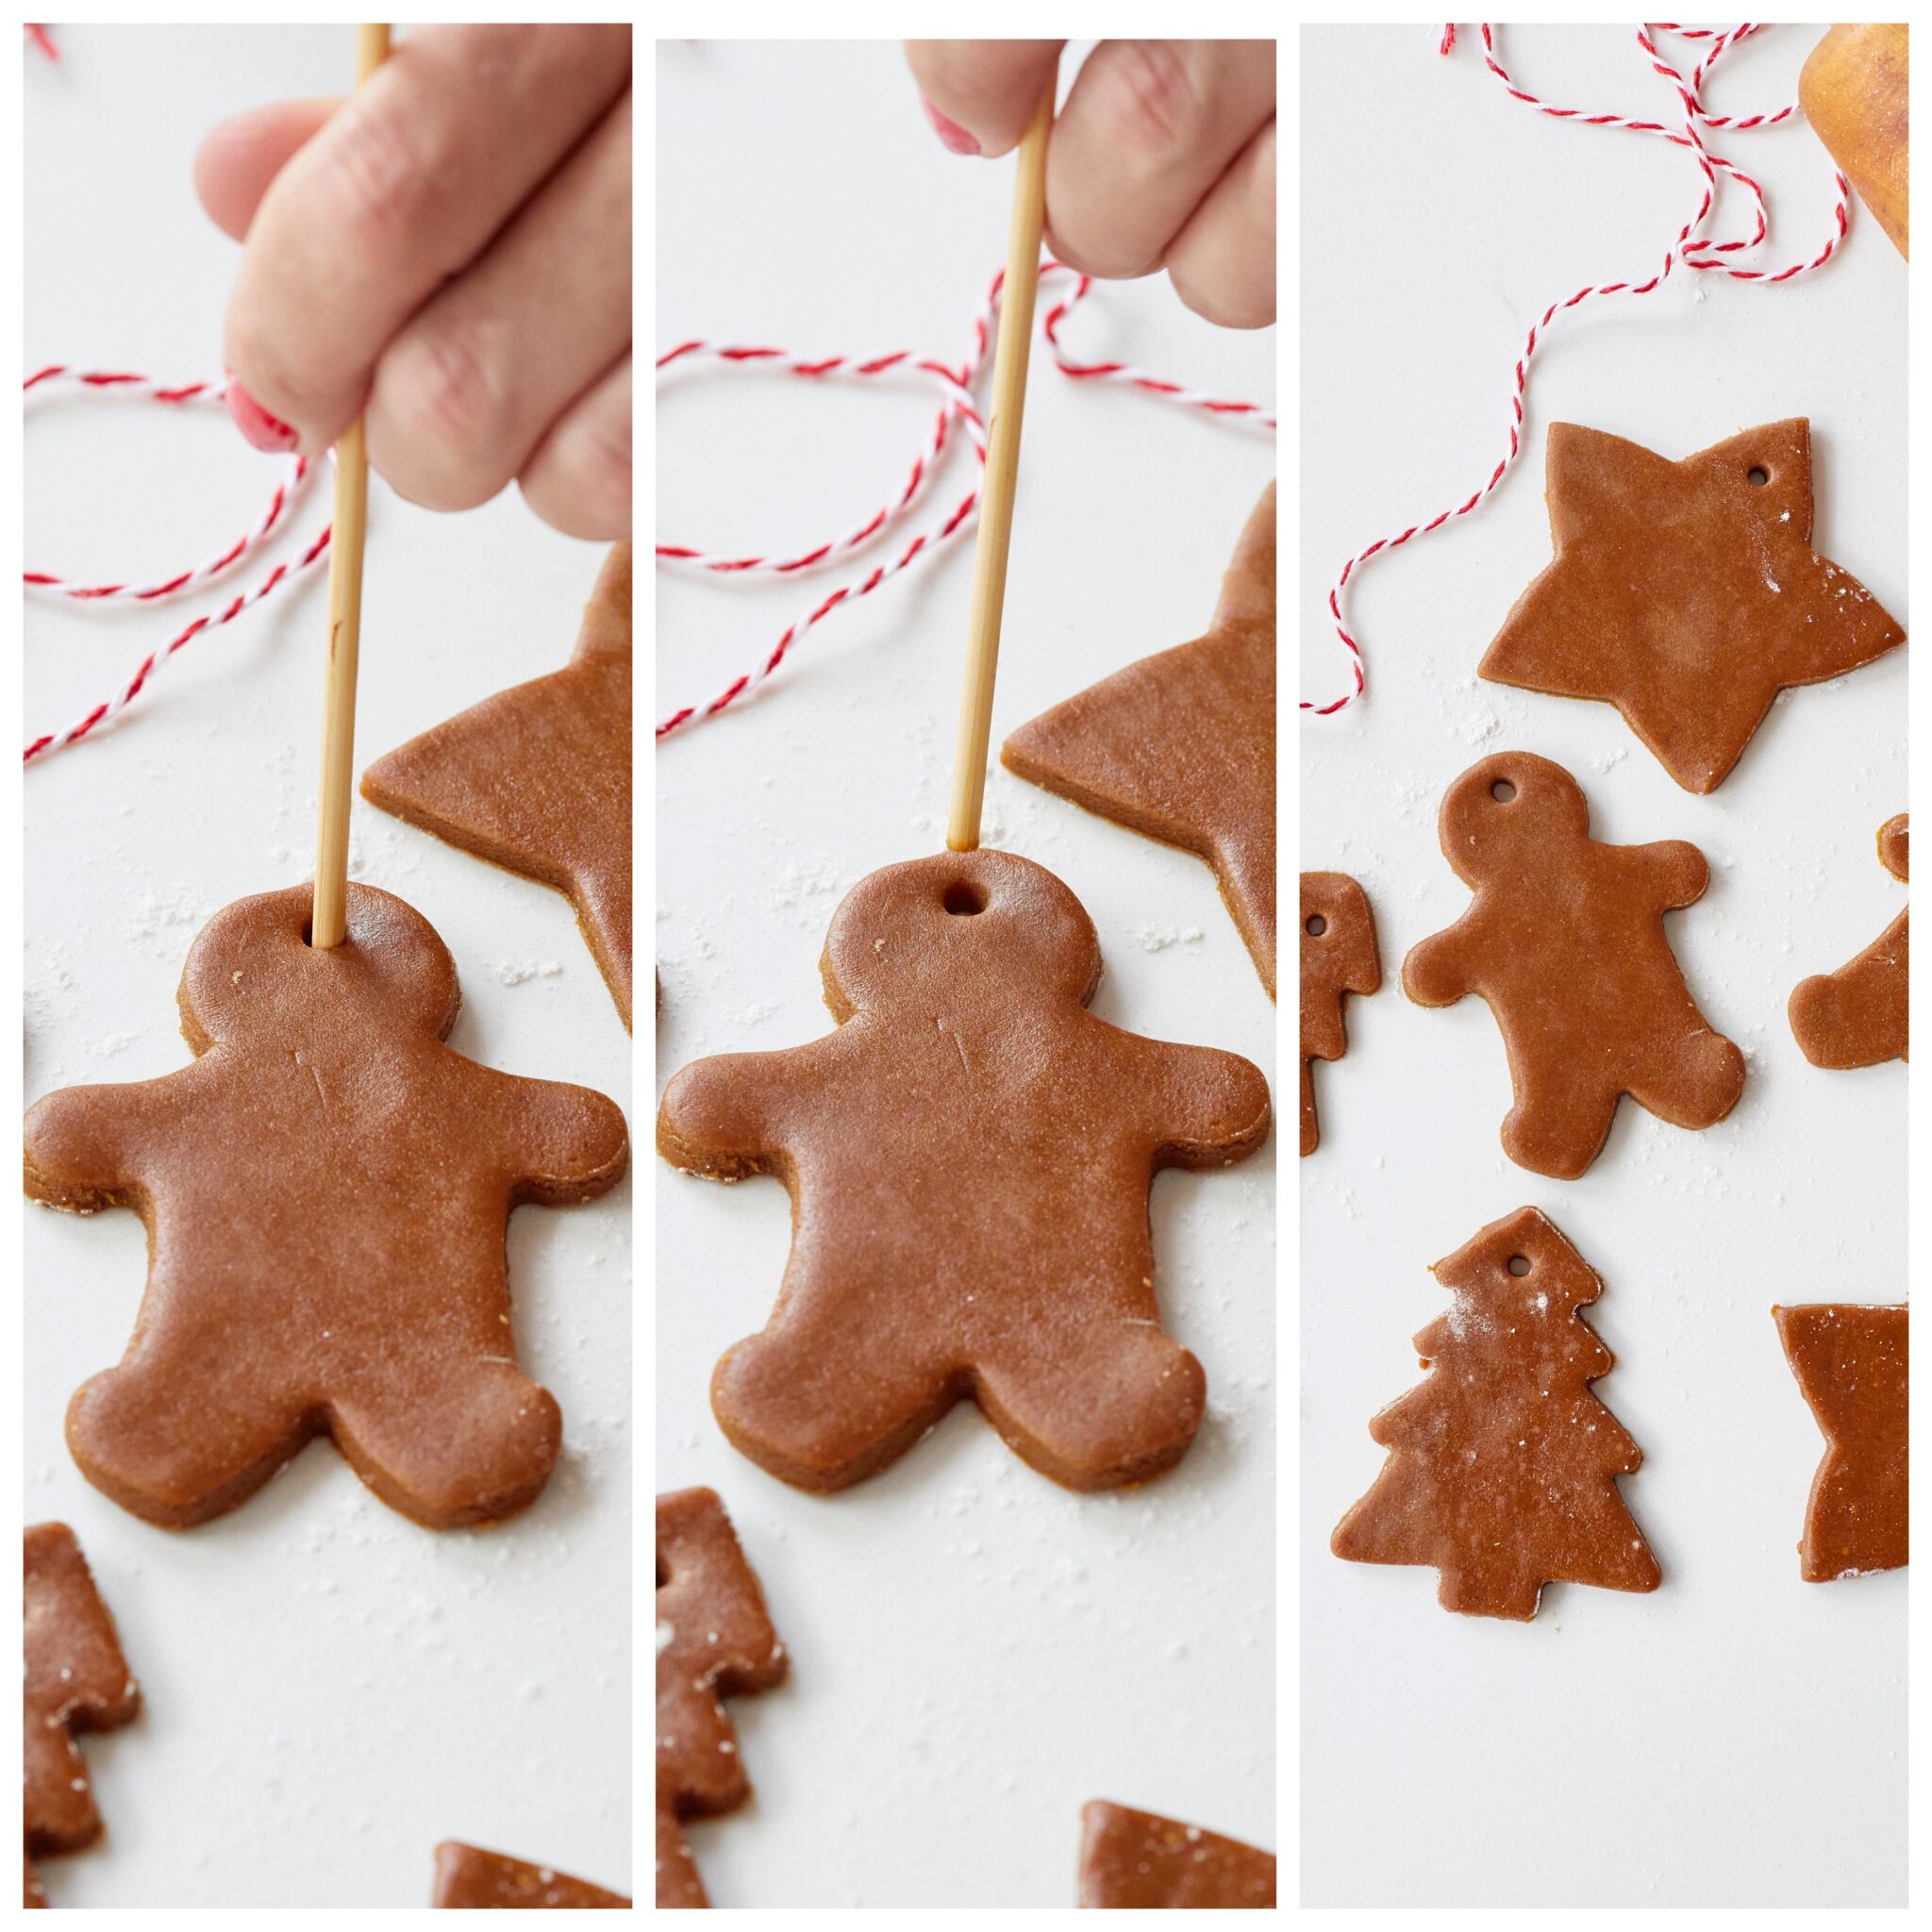 Step-by-step instructions on how to make a Gingerbread Cookie Garland: Place 1/4-inch thick cookies two inches apart on the baking sheets. Poke holes for stringing by pushing the flat end of a wooden skewer through the top of each cookie. 